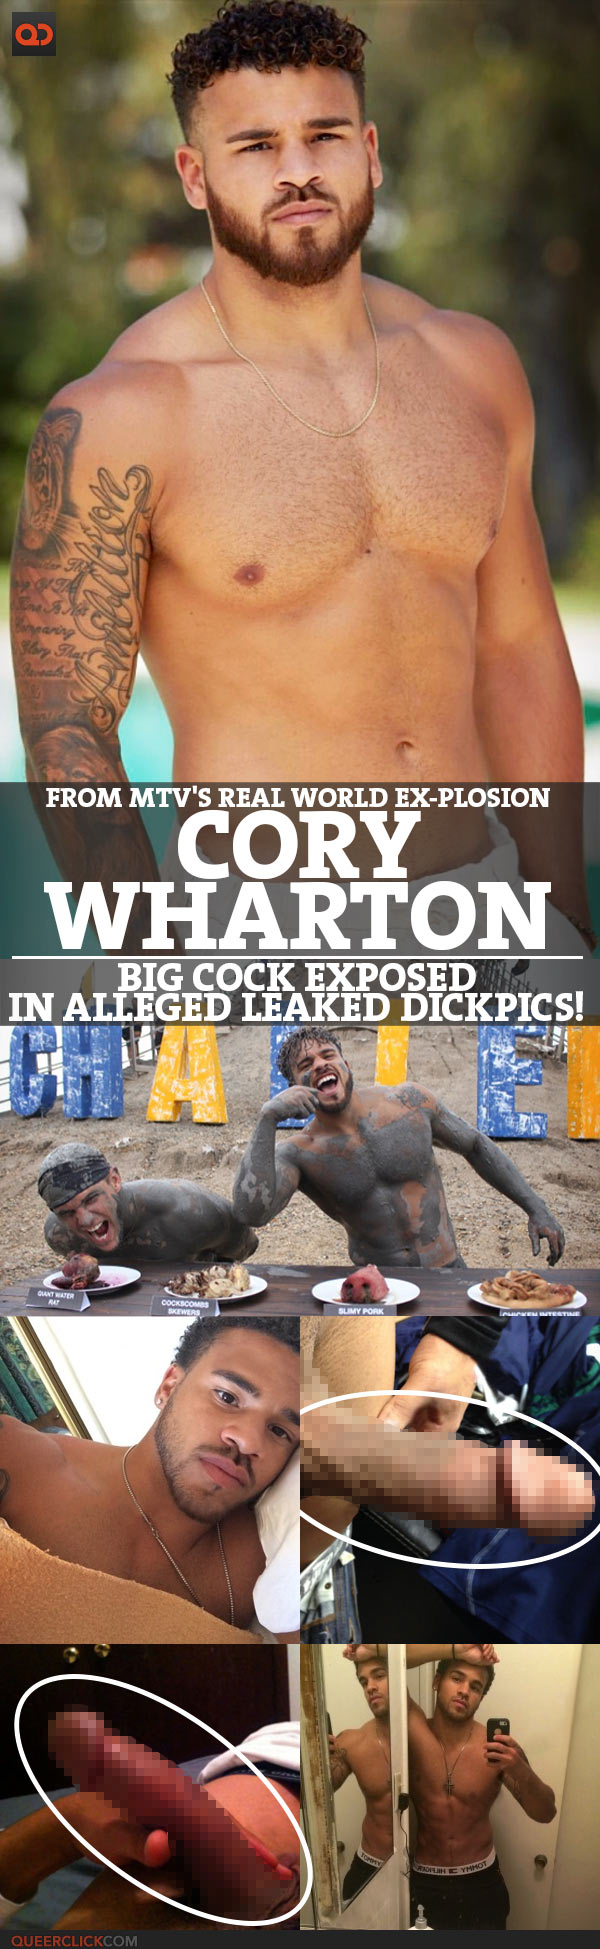 Cory Wharton, From MTV's Real World Ex-Plosion, Big Cock Exposed In Alleged Leaked Dickpics!